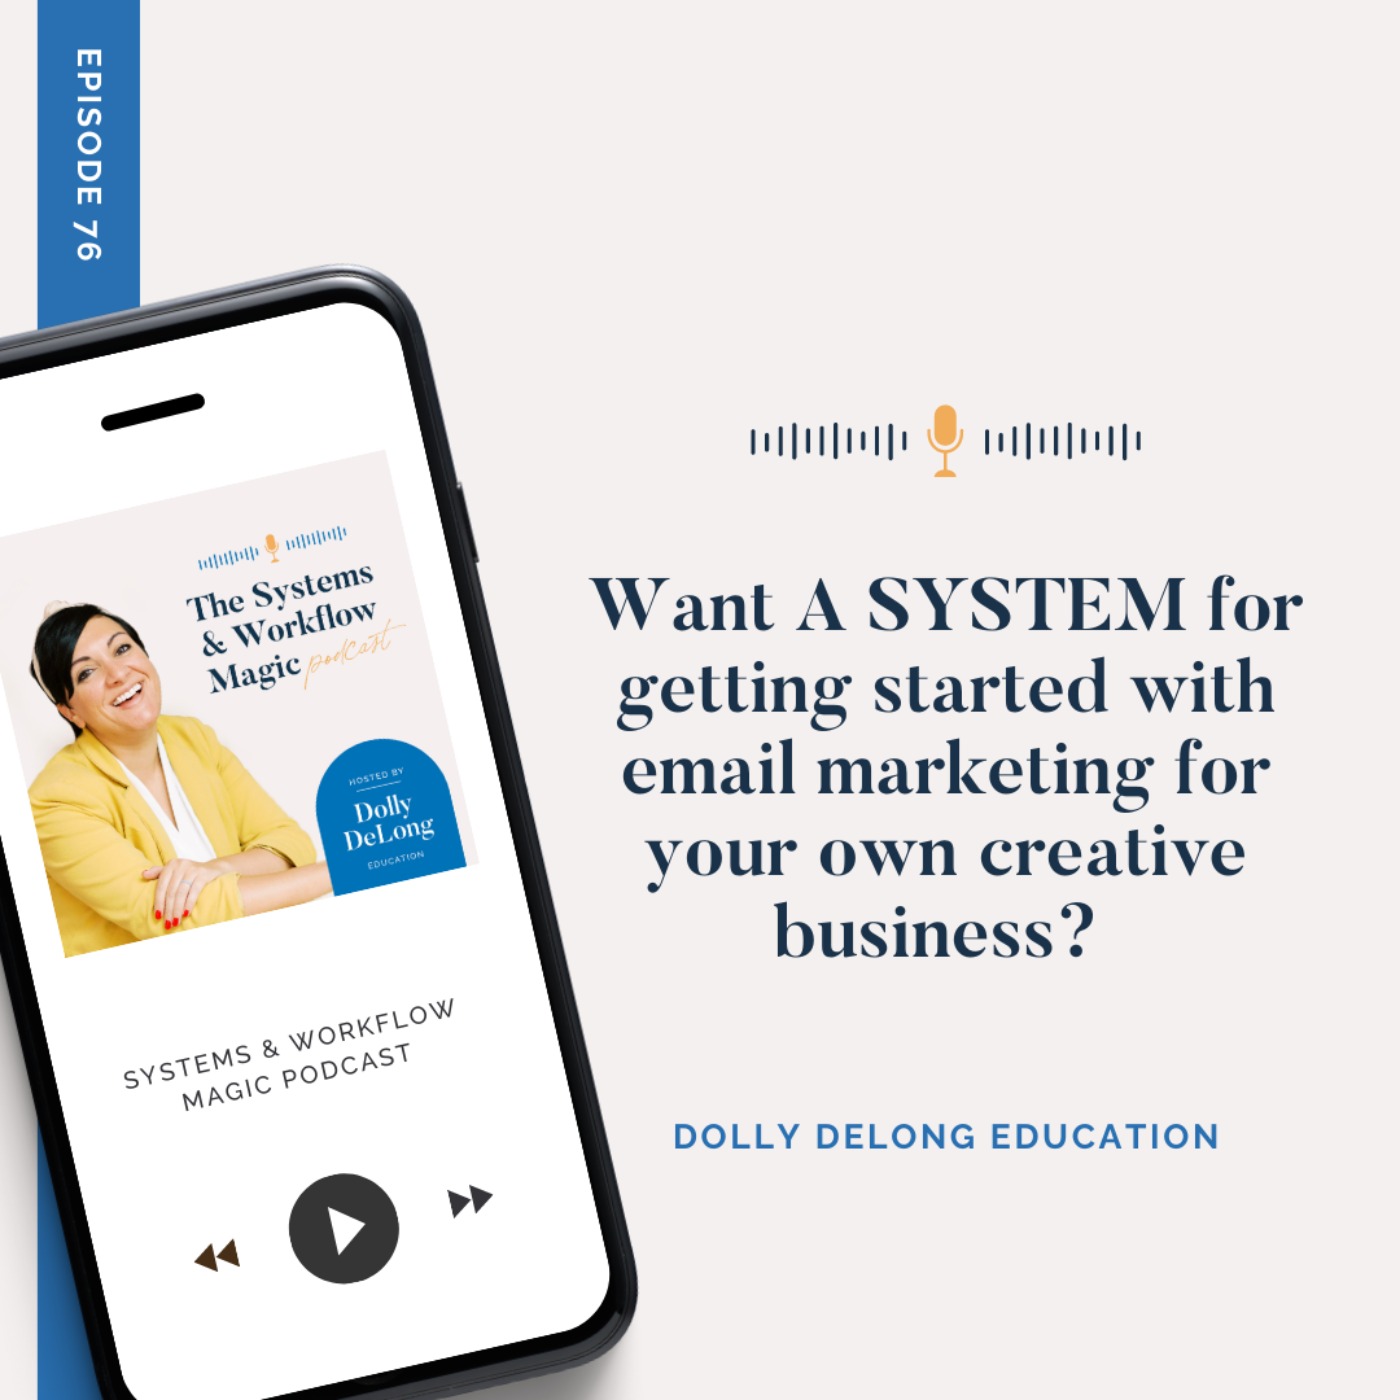 76: Want a SYSTEM for getting started with email marketing for your own creative business?